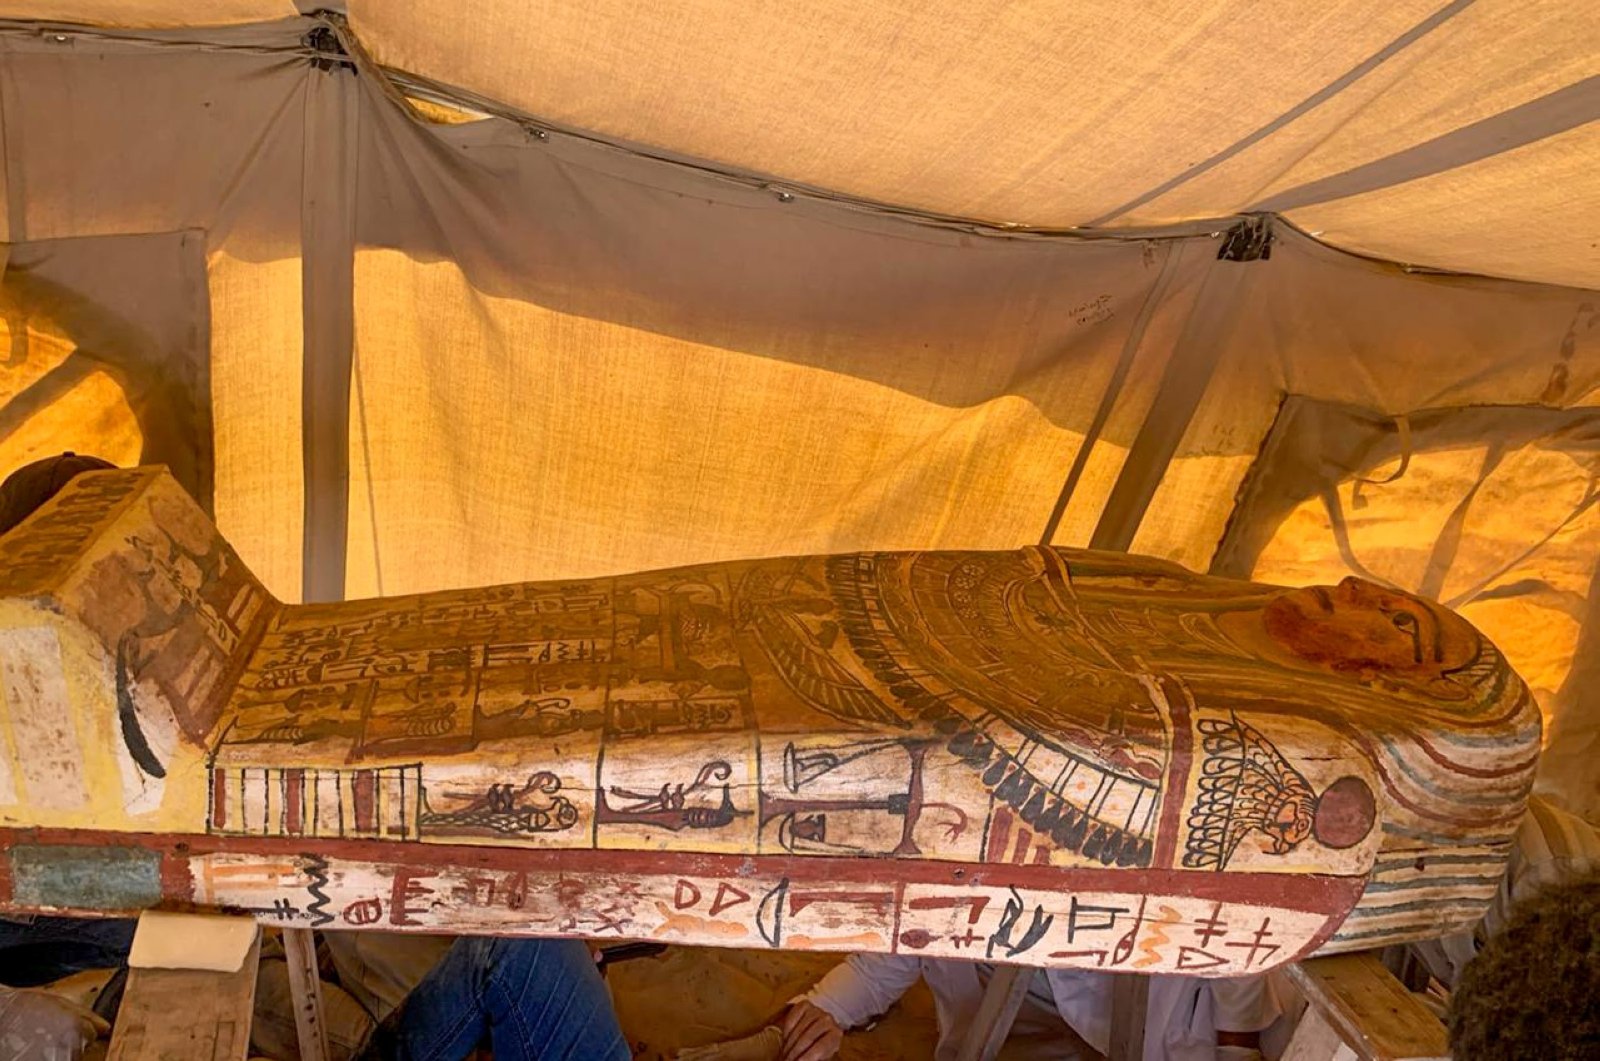 A handout picture released by the Egyptian Ministry of Antiquities on Sept. 20, 2020, shows one of 14 2,500-year-old sarcophagi discovered in a burial shaft at the desert necropolis of Saqqara, south of the capital Cairo. (Reuters Photo)